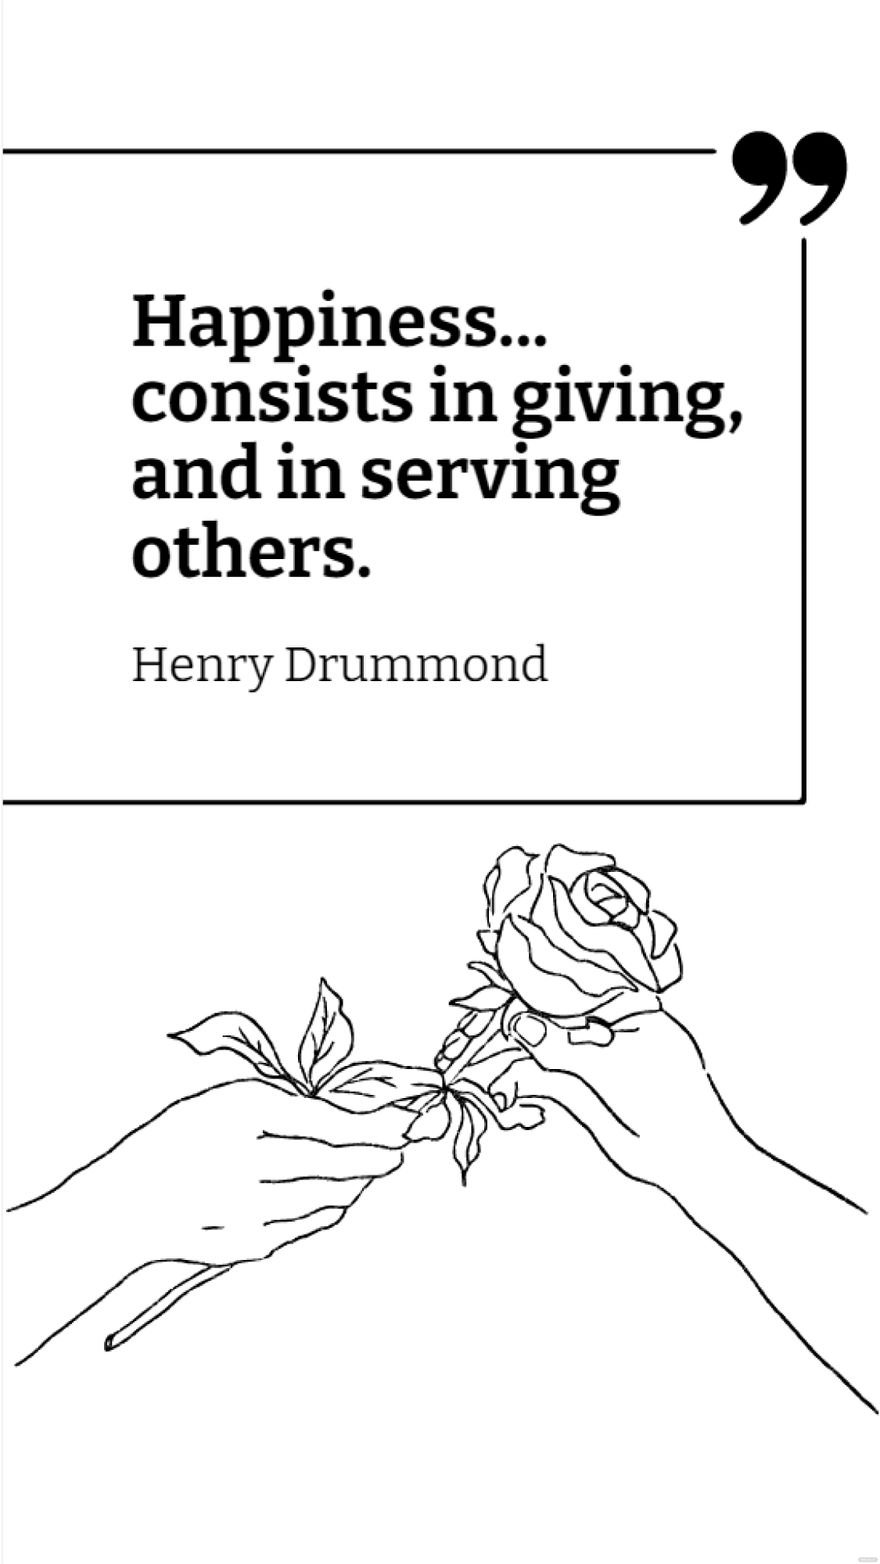 Free Henry Drummond - Happiness... consists in giving, and in serving others.